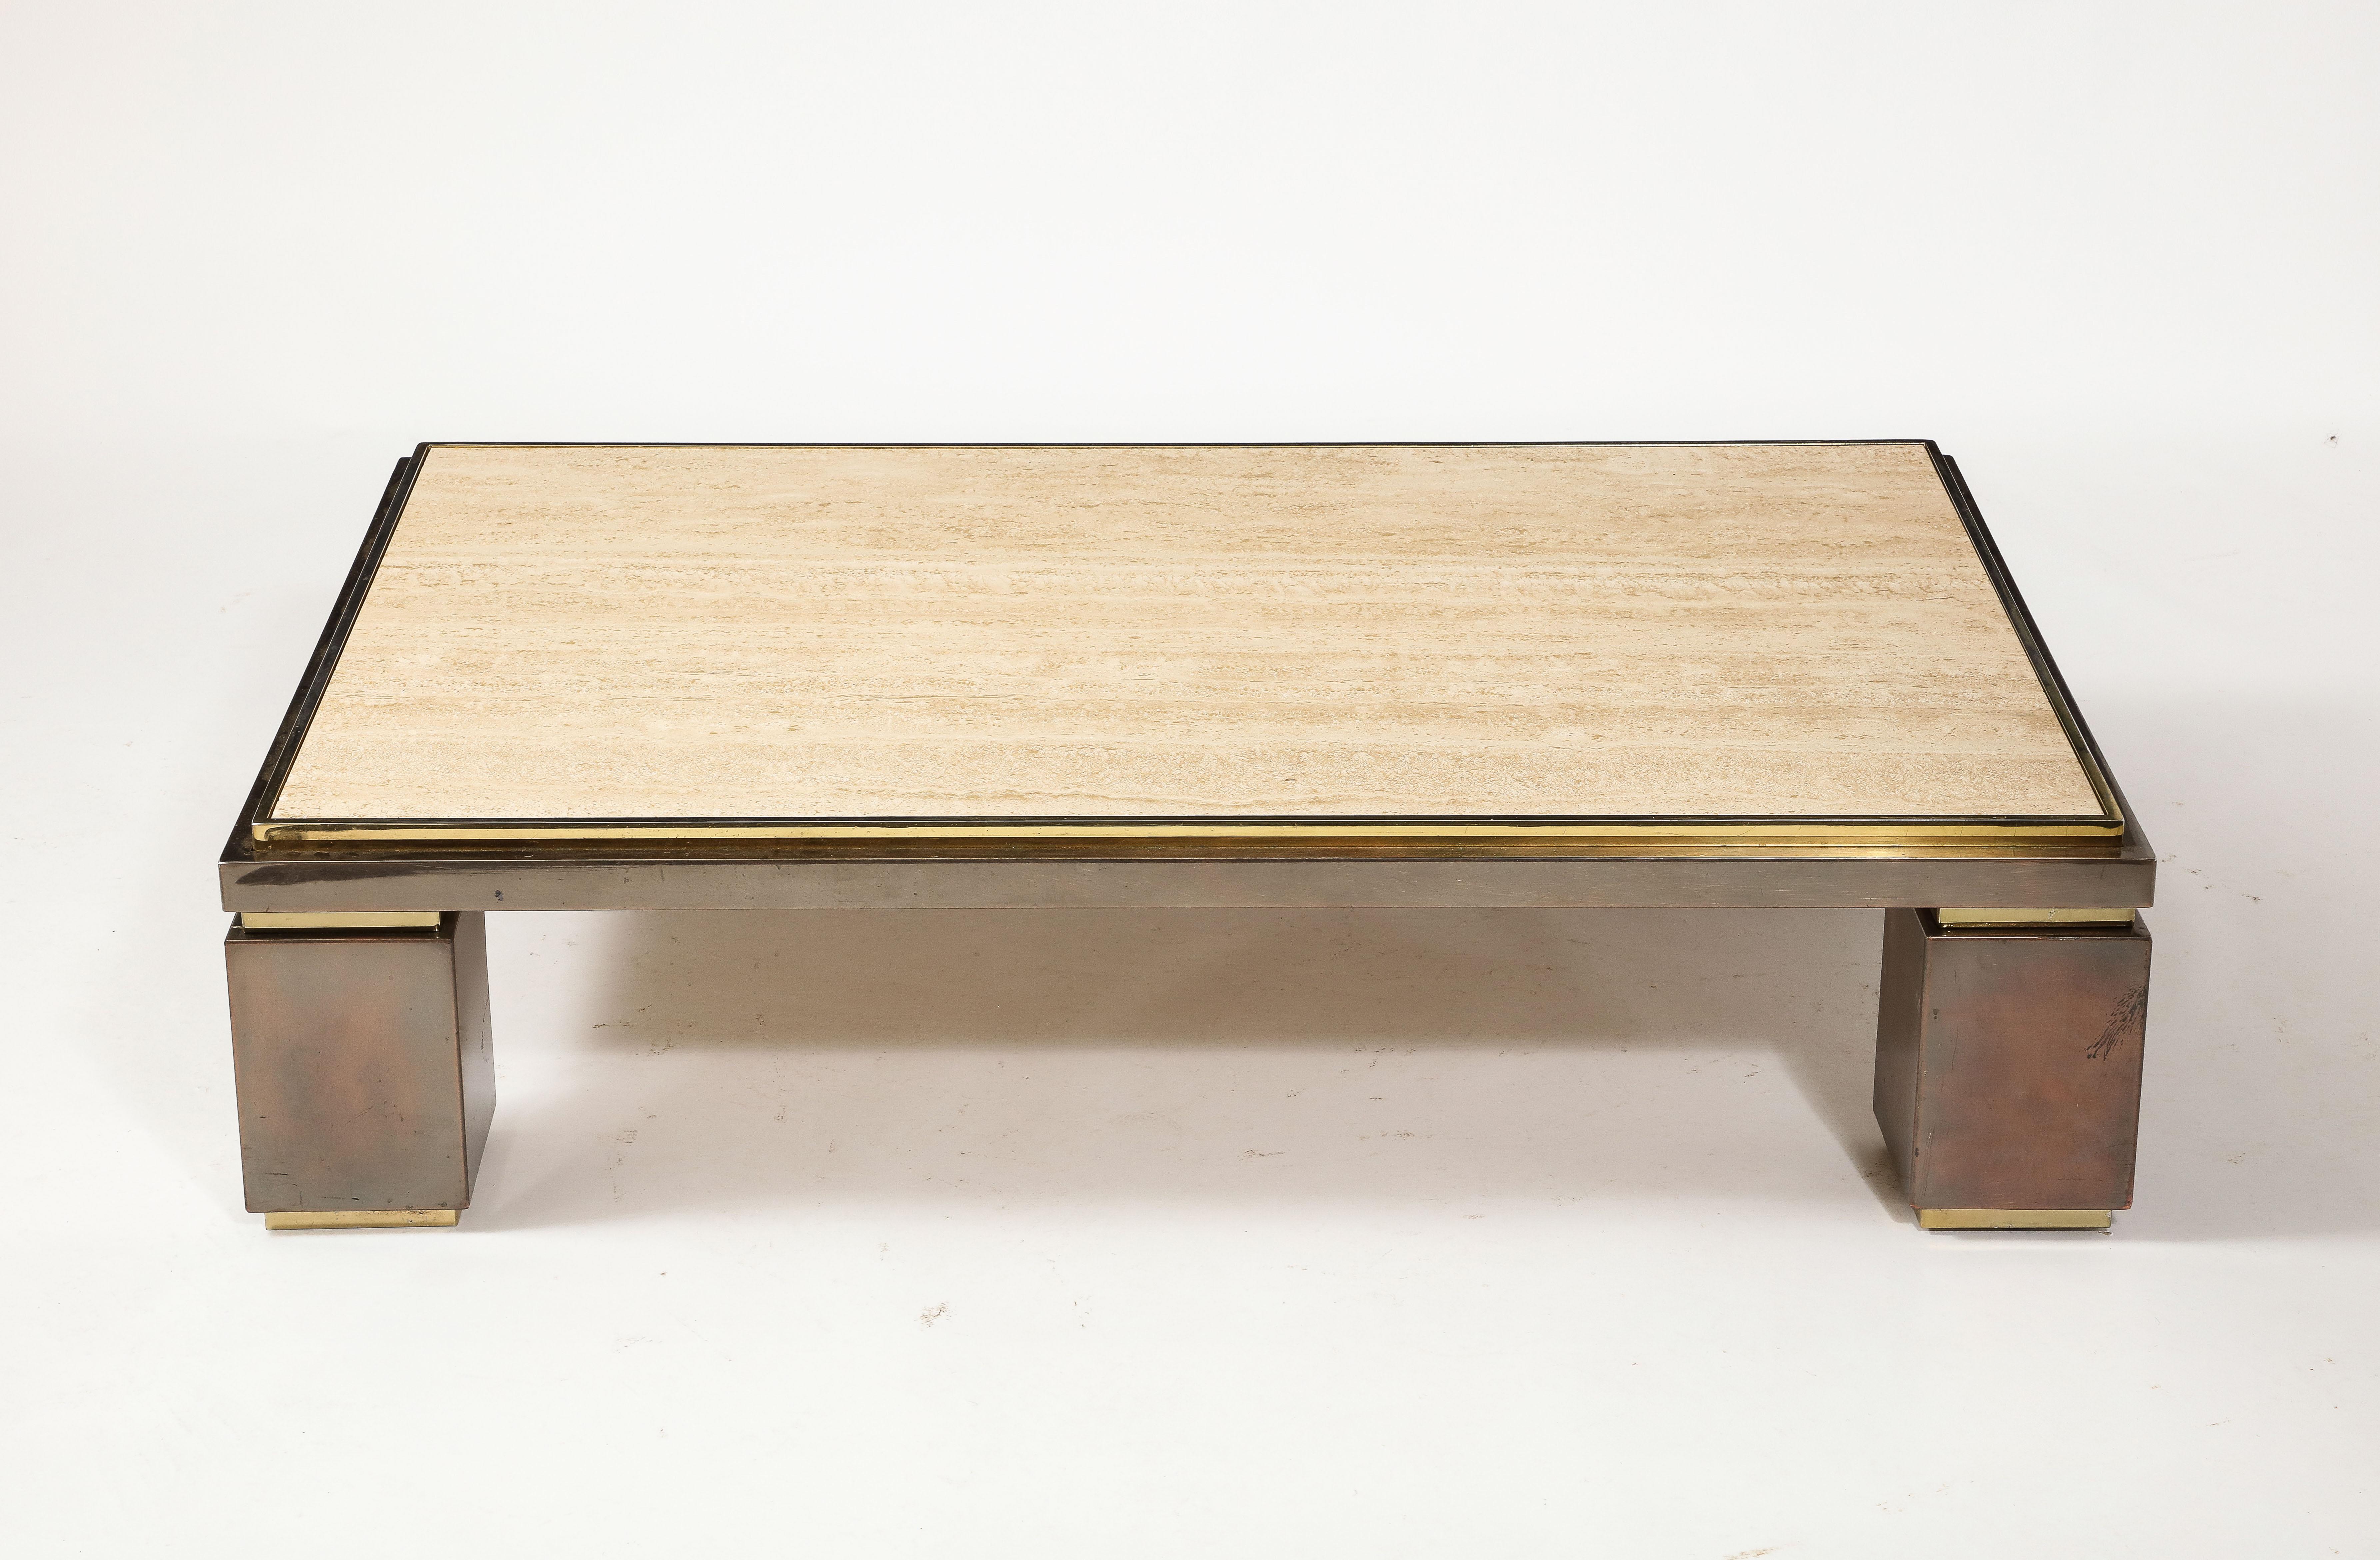 Large Deco Style BelgoChrom Travertine & Brass Coffee Table, Belgium 1960's For Sale 2